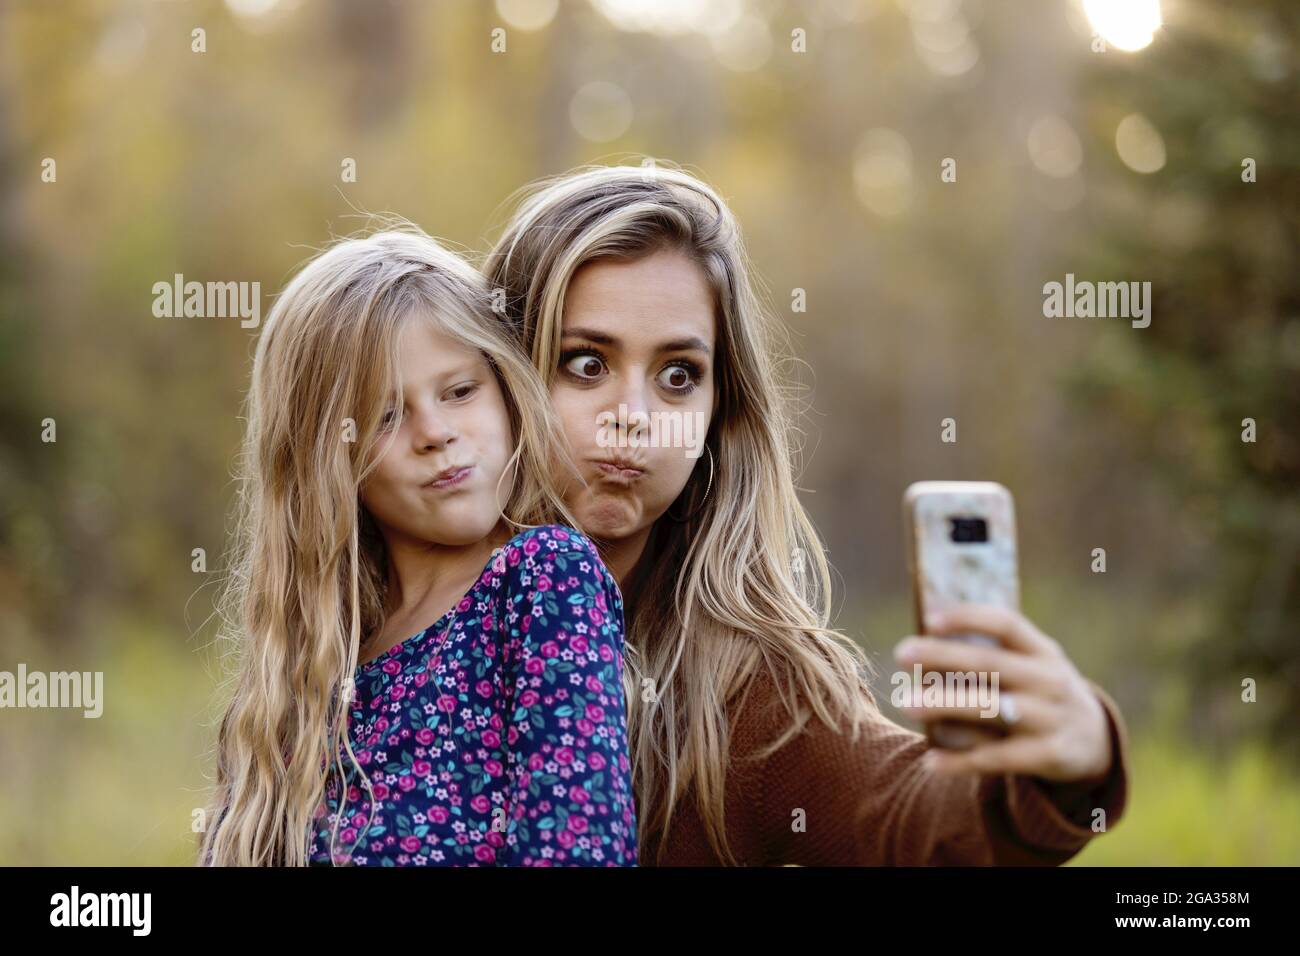 A mother spending quality time outdoors with her daughter and taking a self-portrait in a city park; Edmonton, Alberta, Canada Stock Photo